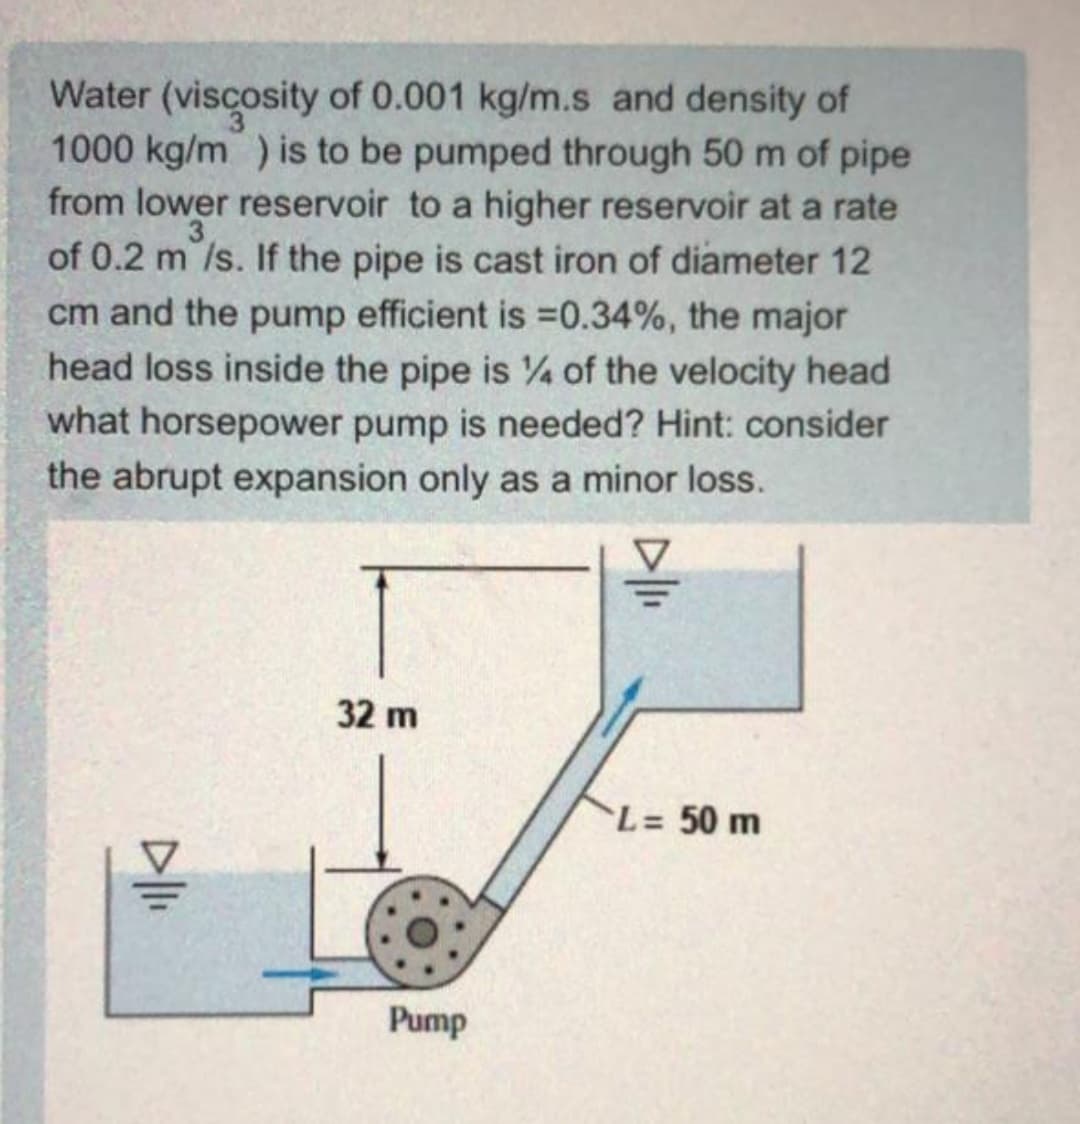 Water (viscosity of 0.001 kg/m.s and density of
1000 kg/m ) is to be pumped through 50 m of pipe
from lower reservoir to a higher reservoir at a rate
of 0.2 m /s. If the pipe is cast iron of diameter 12
3.
cm and the pump efficient is =0.34%, the major
head loss inside the pipe is ¼ of the velocity head
what horsepower pump is needed? Hint: consider
the abrupt expansion only as a minor loss.
32 m
L = 50 m
Pump
